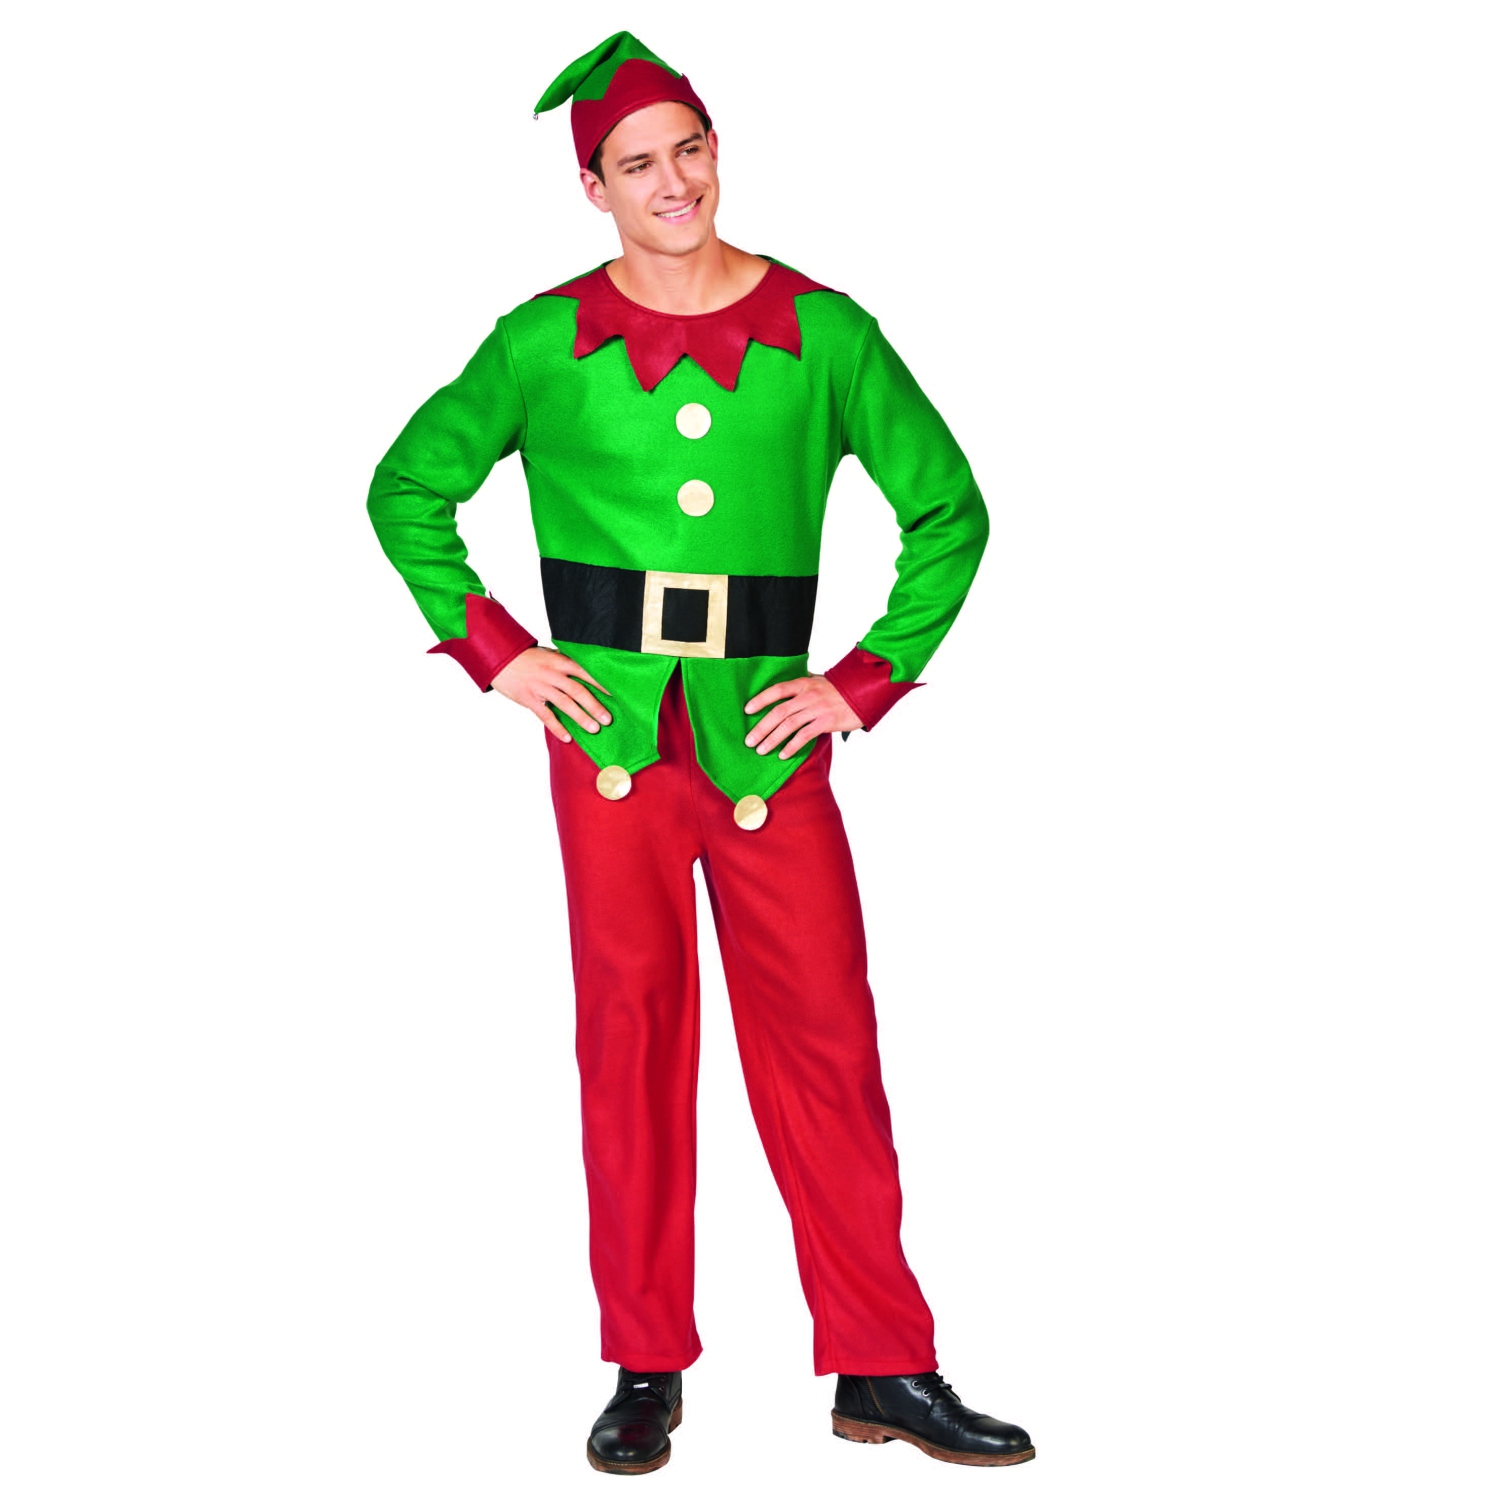 45" Red and Green Men's Elf Costume With a Christmas Santa Hat - Plus Size